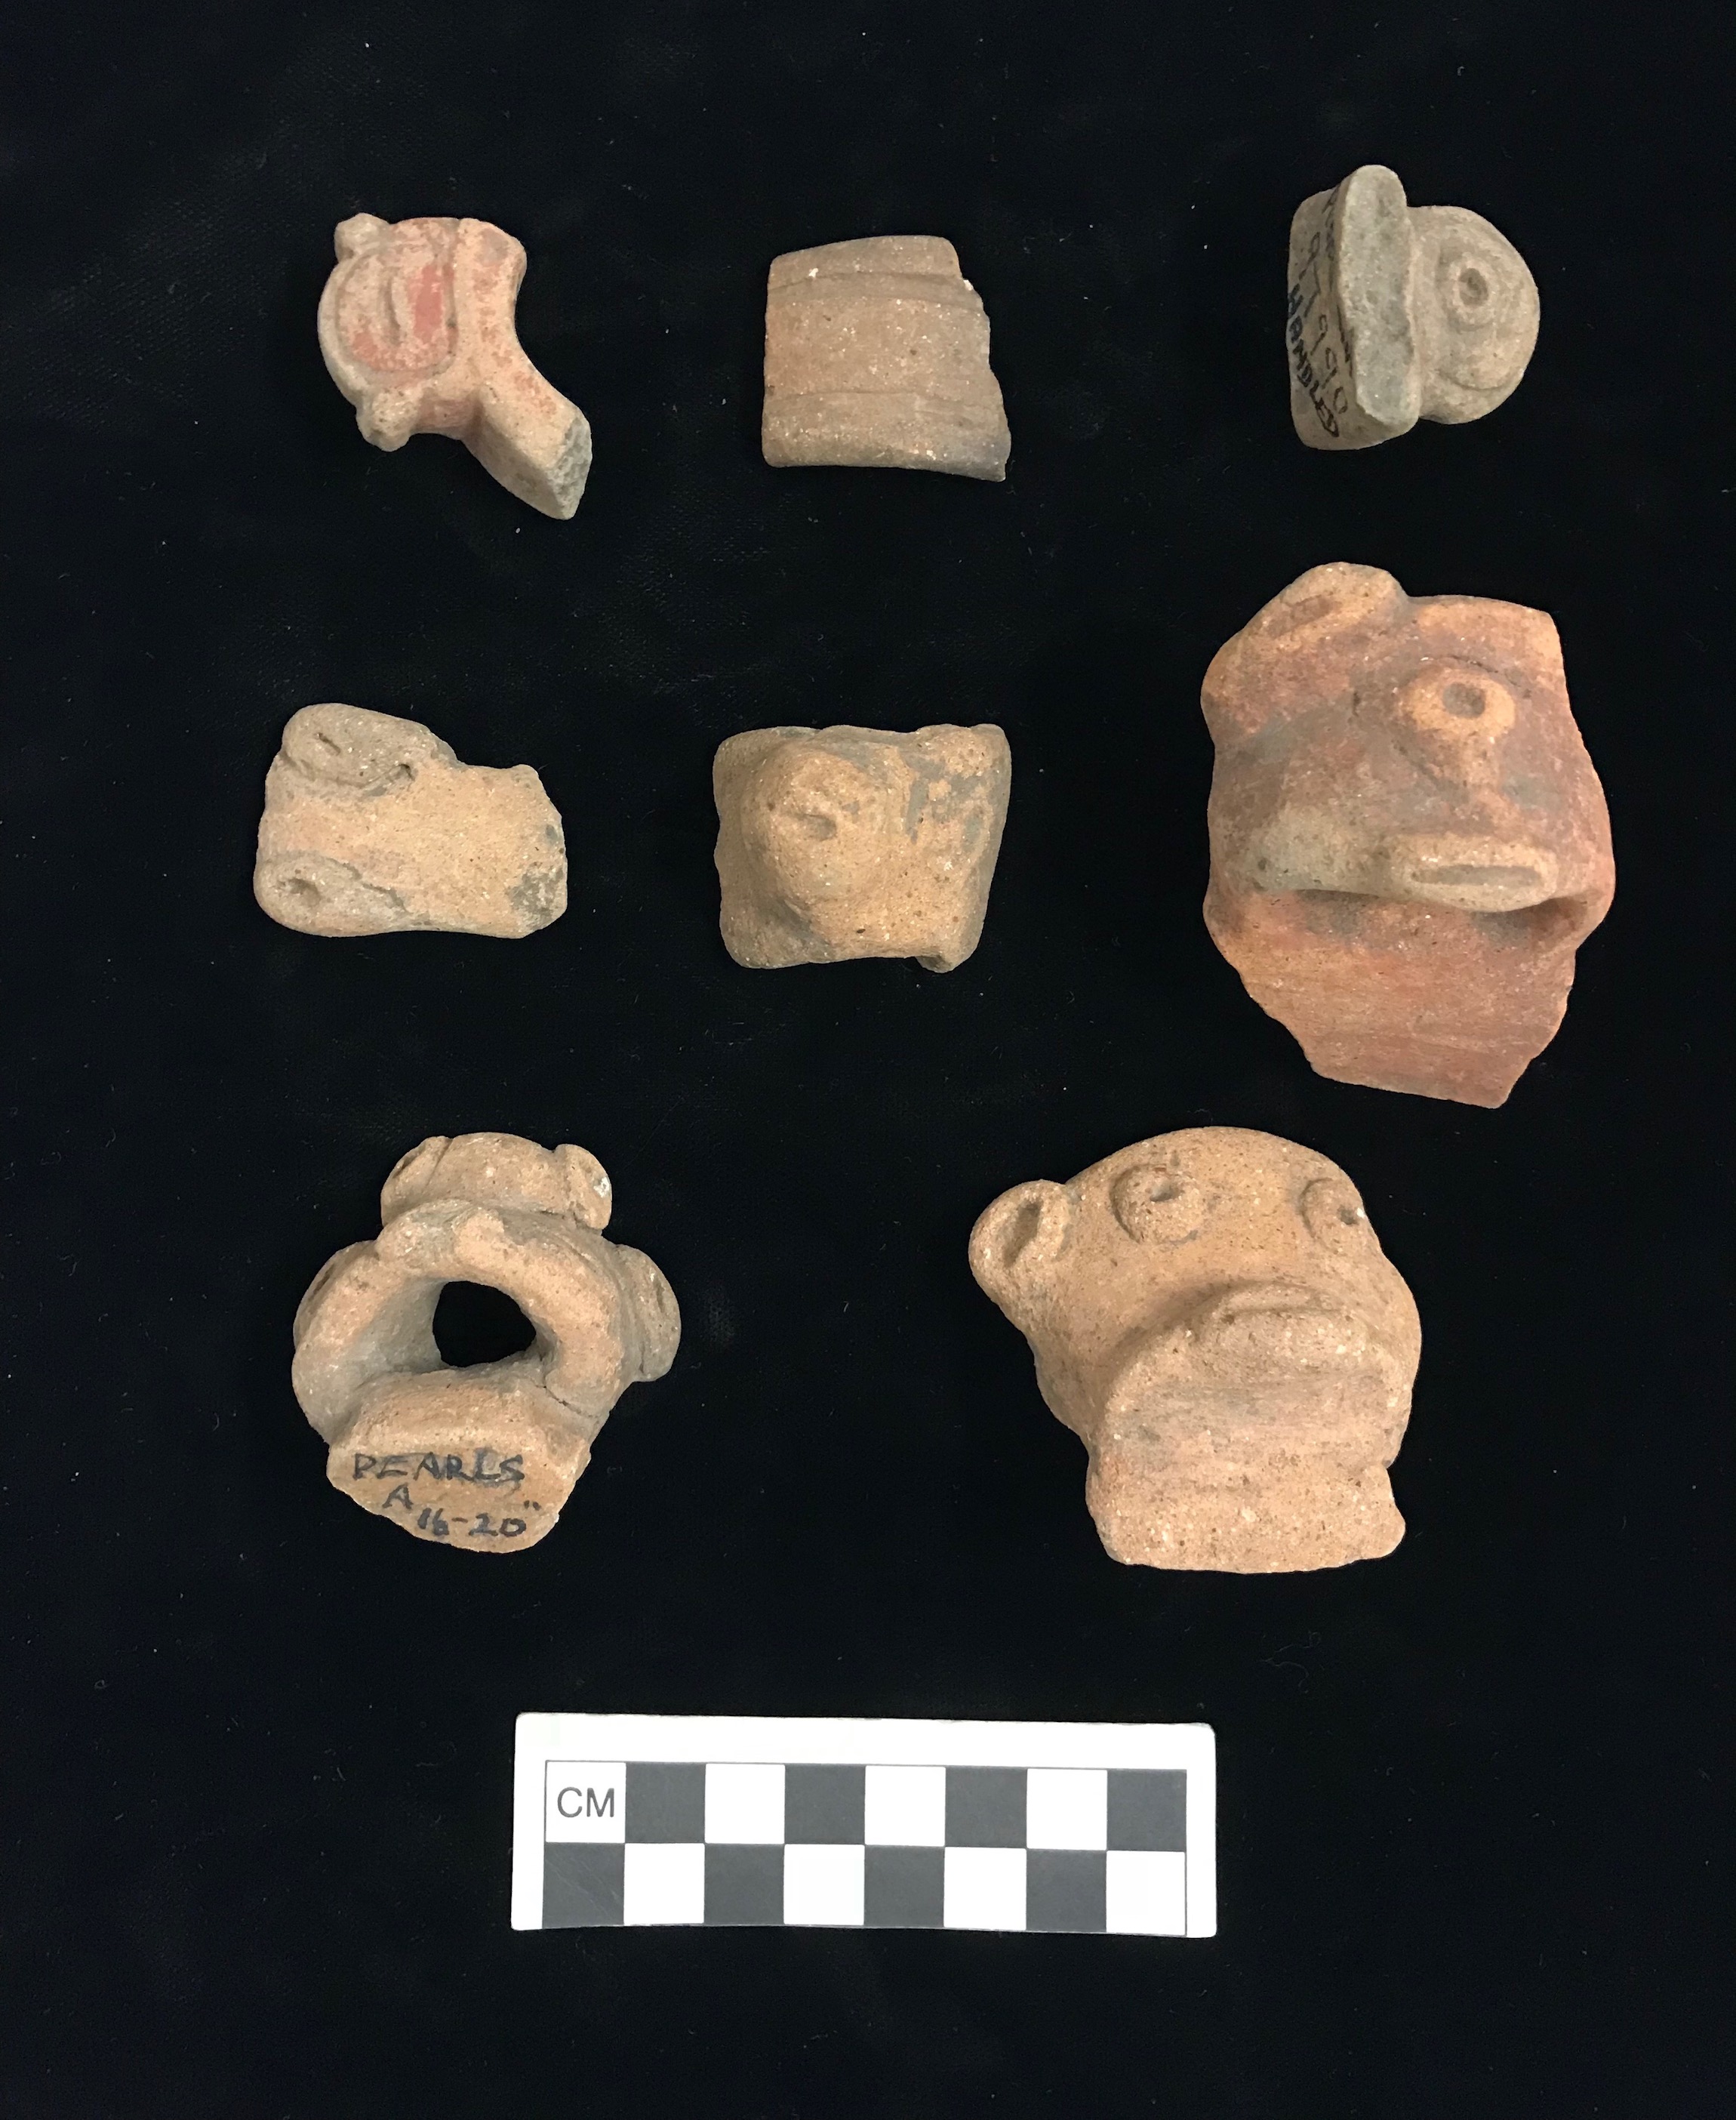 Plate XI. PEARLS AND SIMON WIDE HANDLED SHERDS. FLMNH Acc. Nos. 97990, 97991, 97994, and 97995.